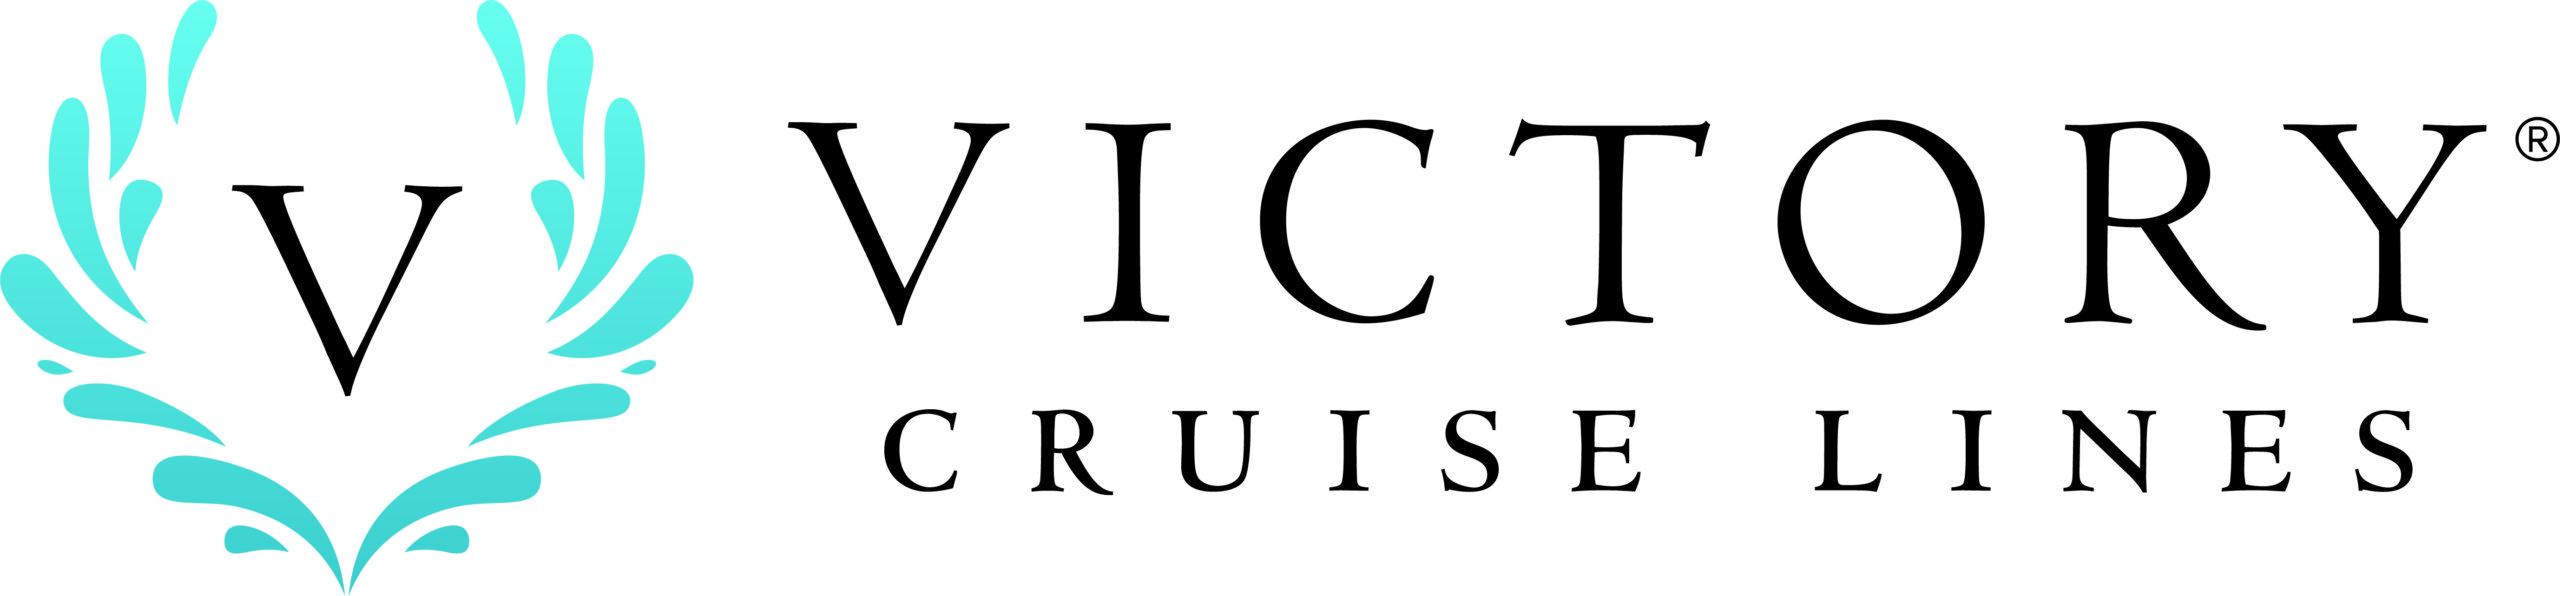 Sailing for Victory Cruise Lines Logo